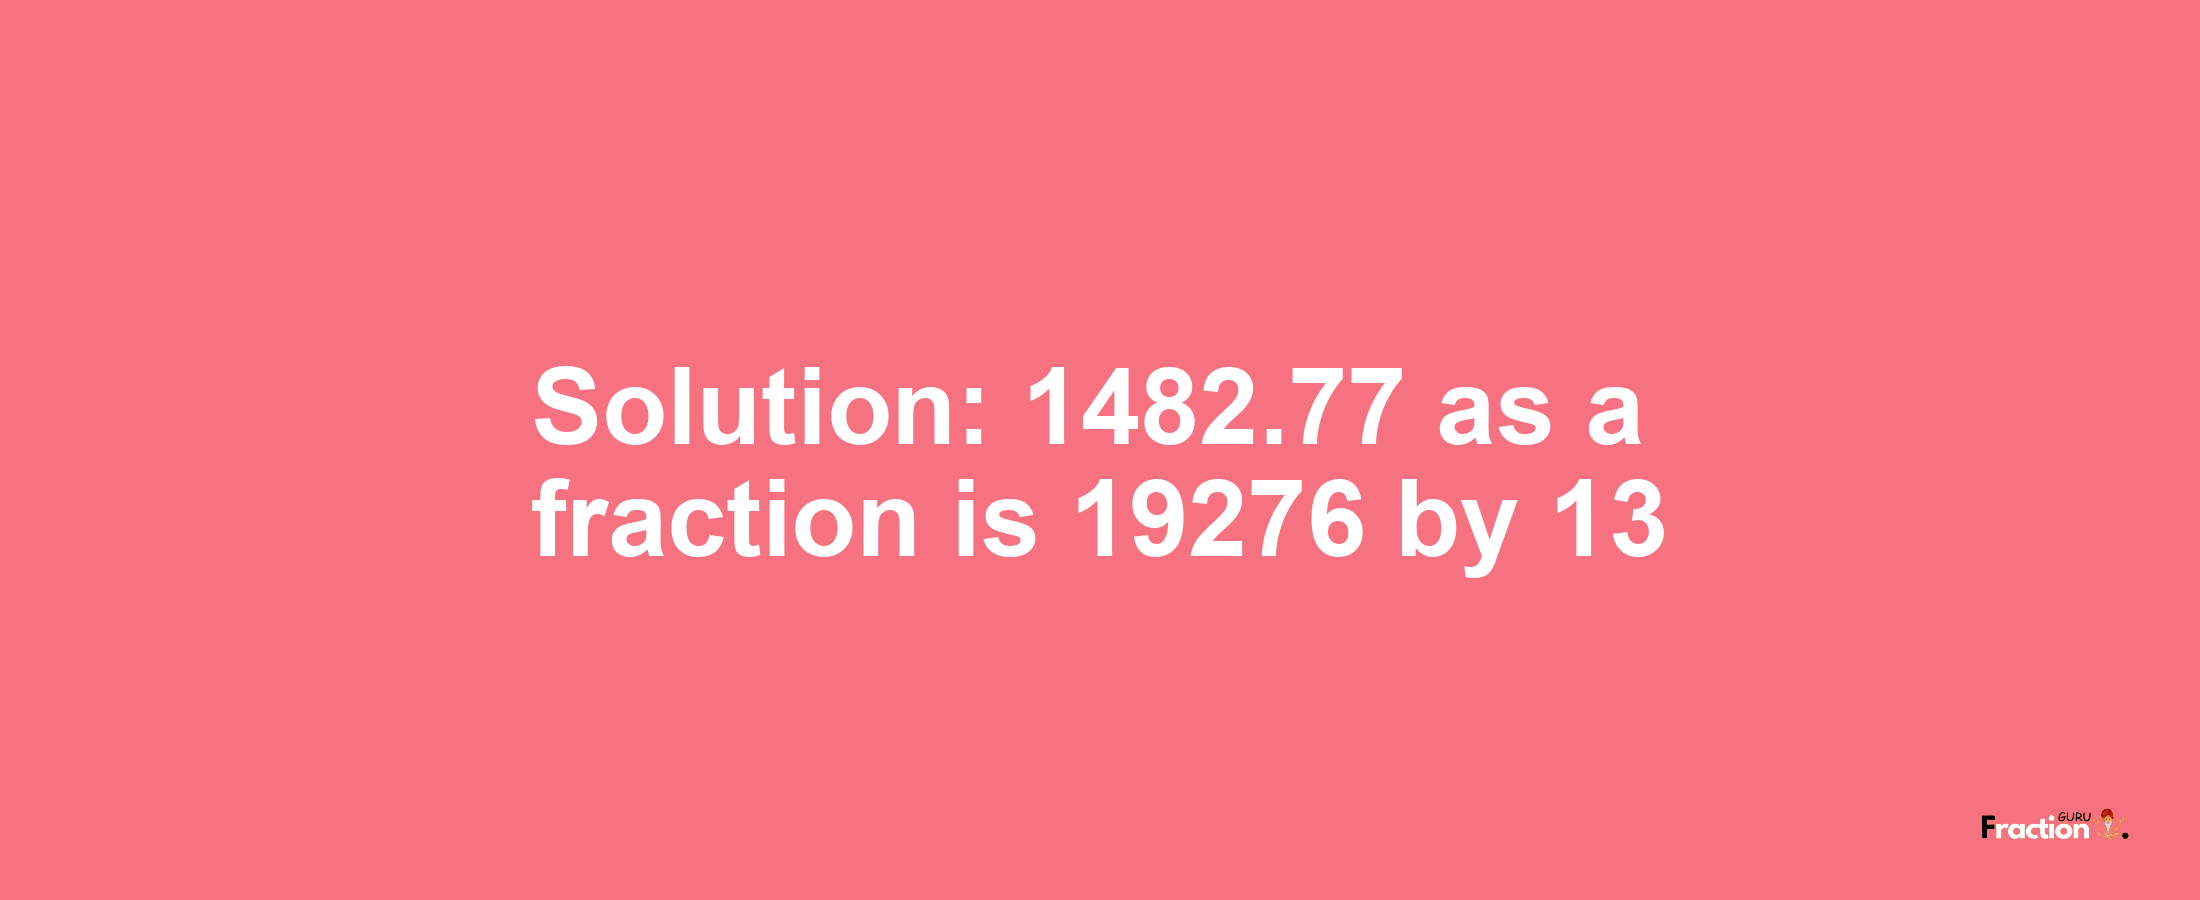 Solution:1482.77 as a fraction is 19276/13